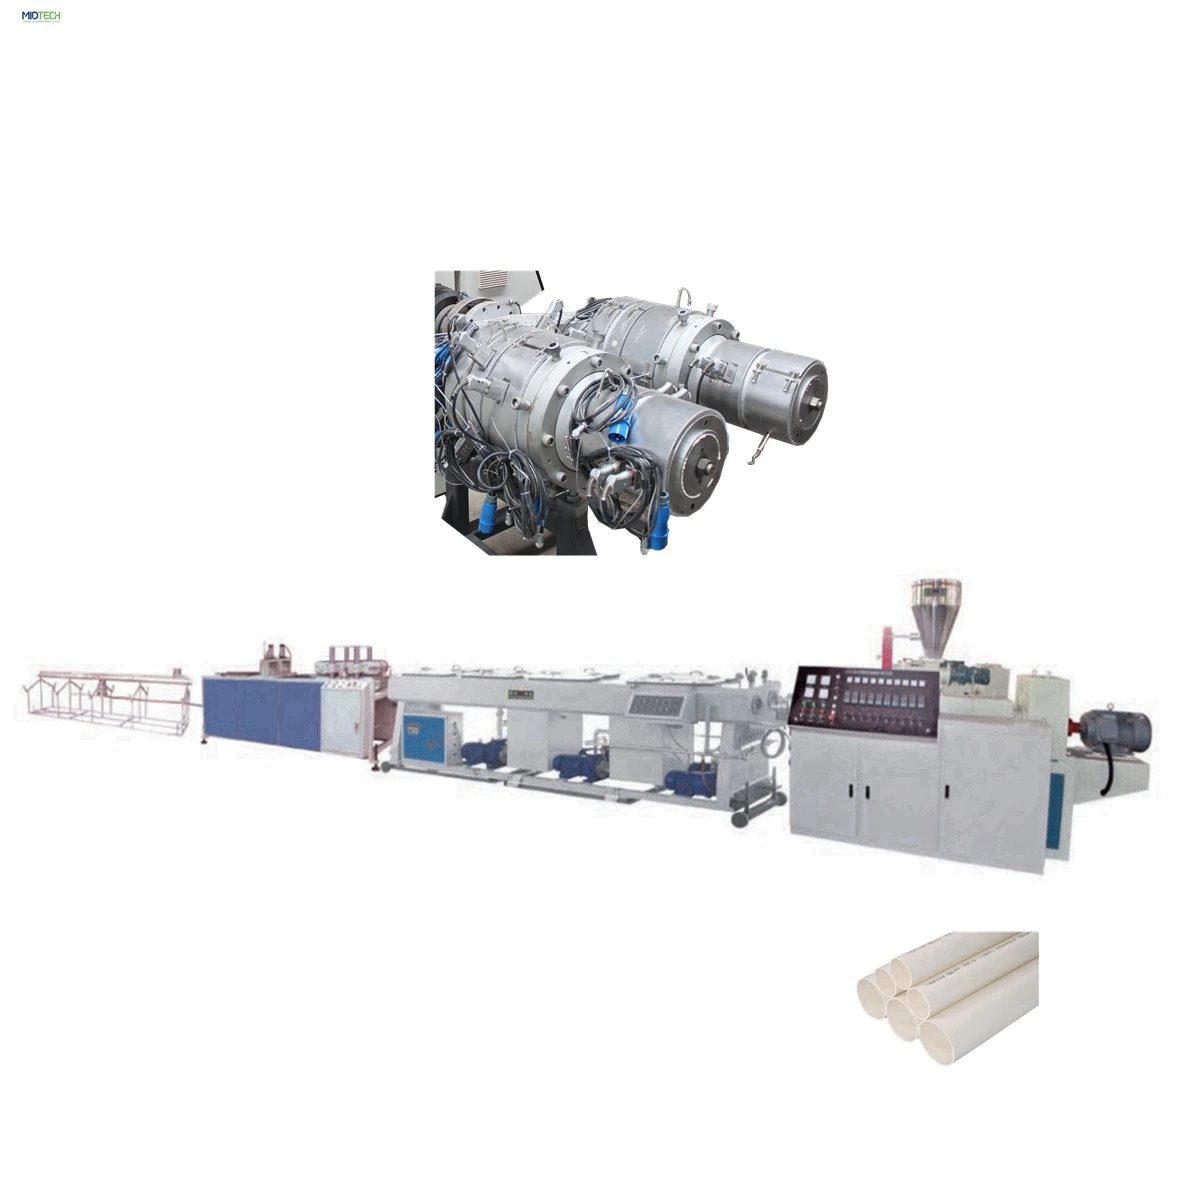 Two die head pvc pipe tube manufacturing machinery / double pvc conduit pipe production line machinery